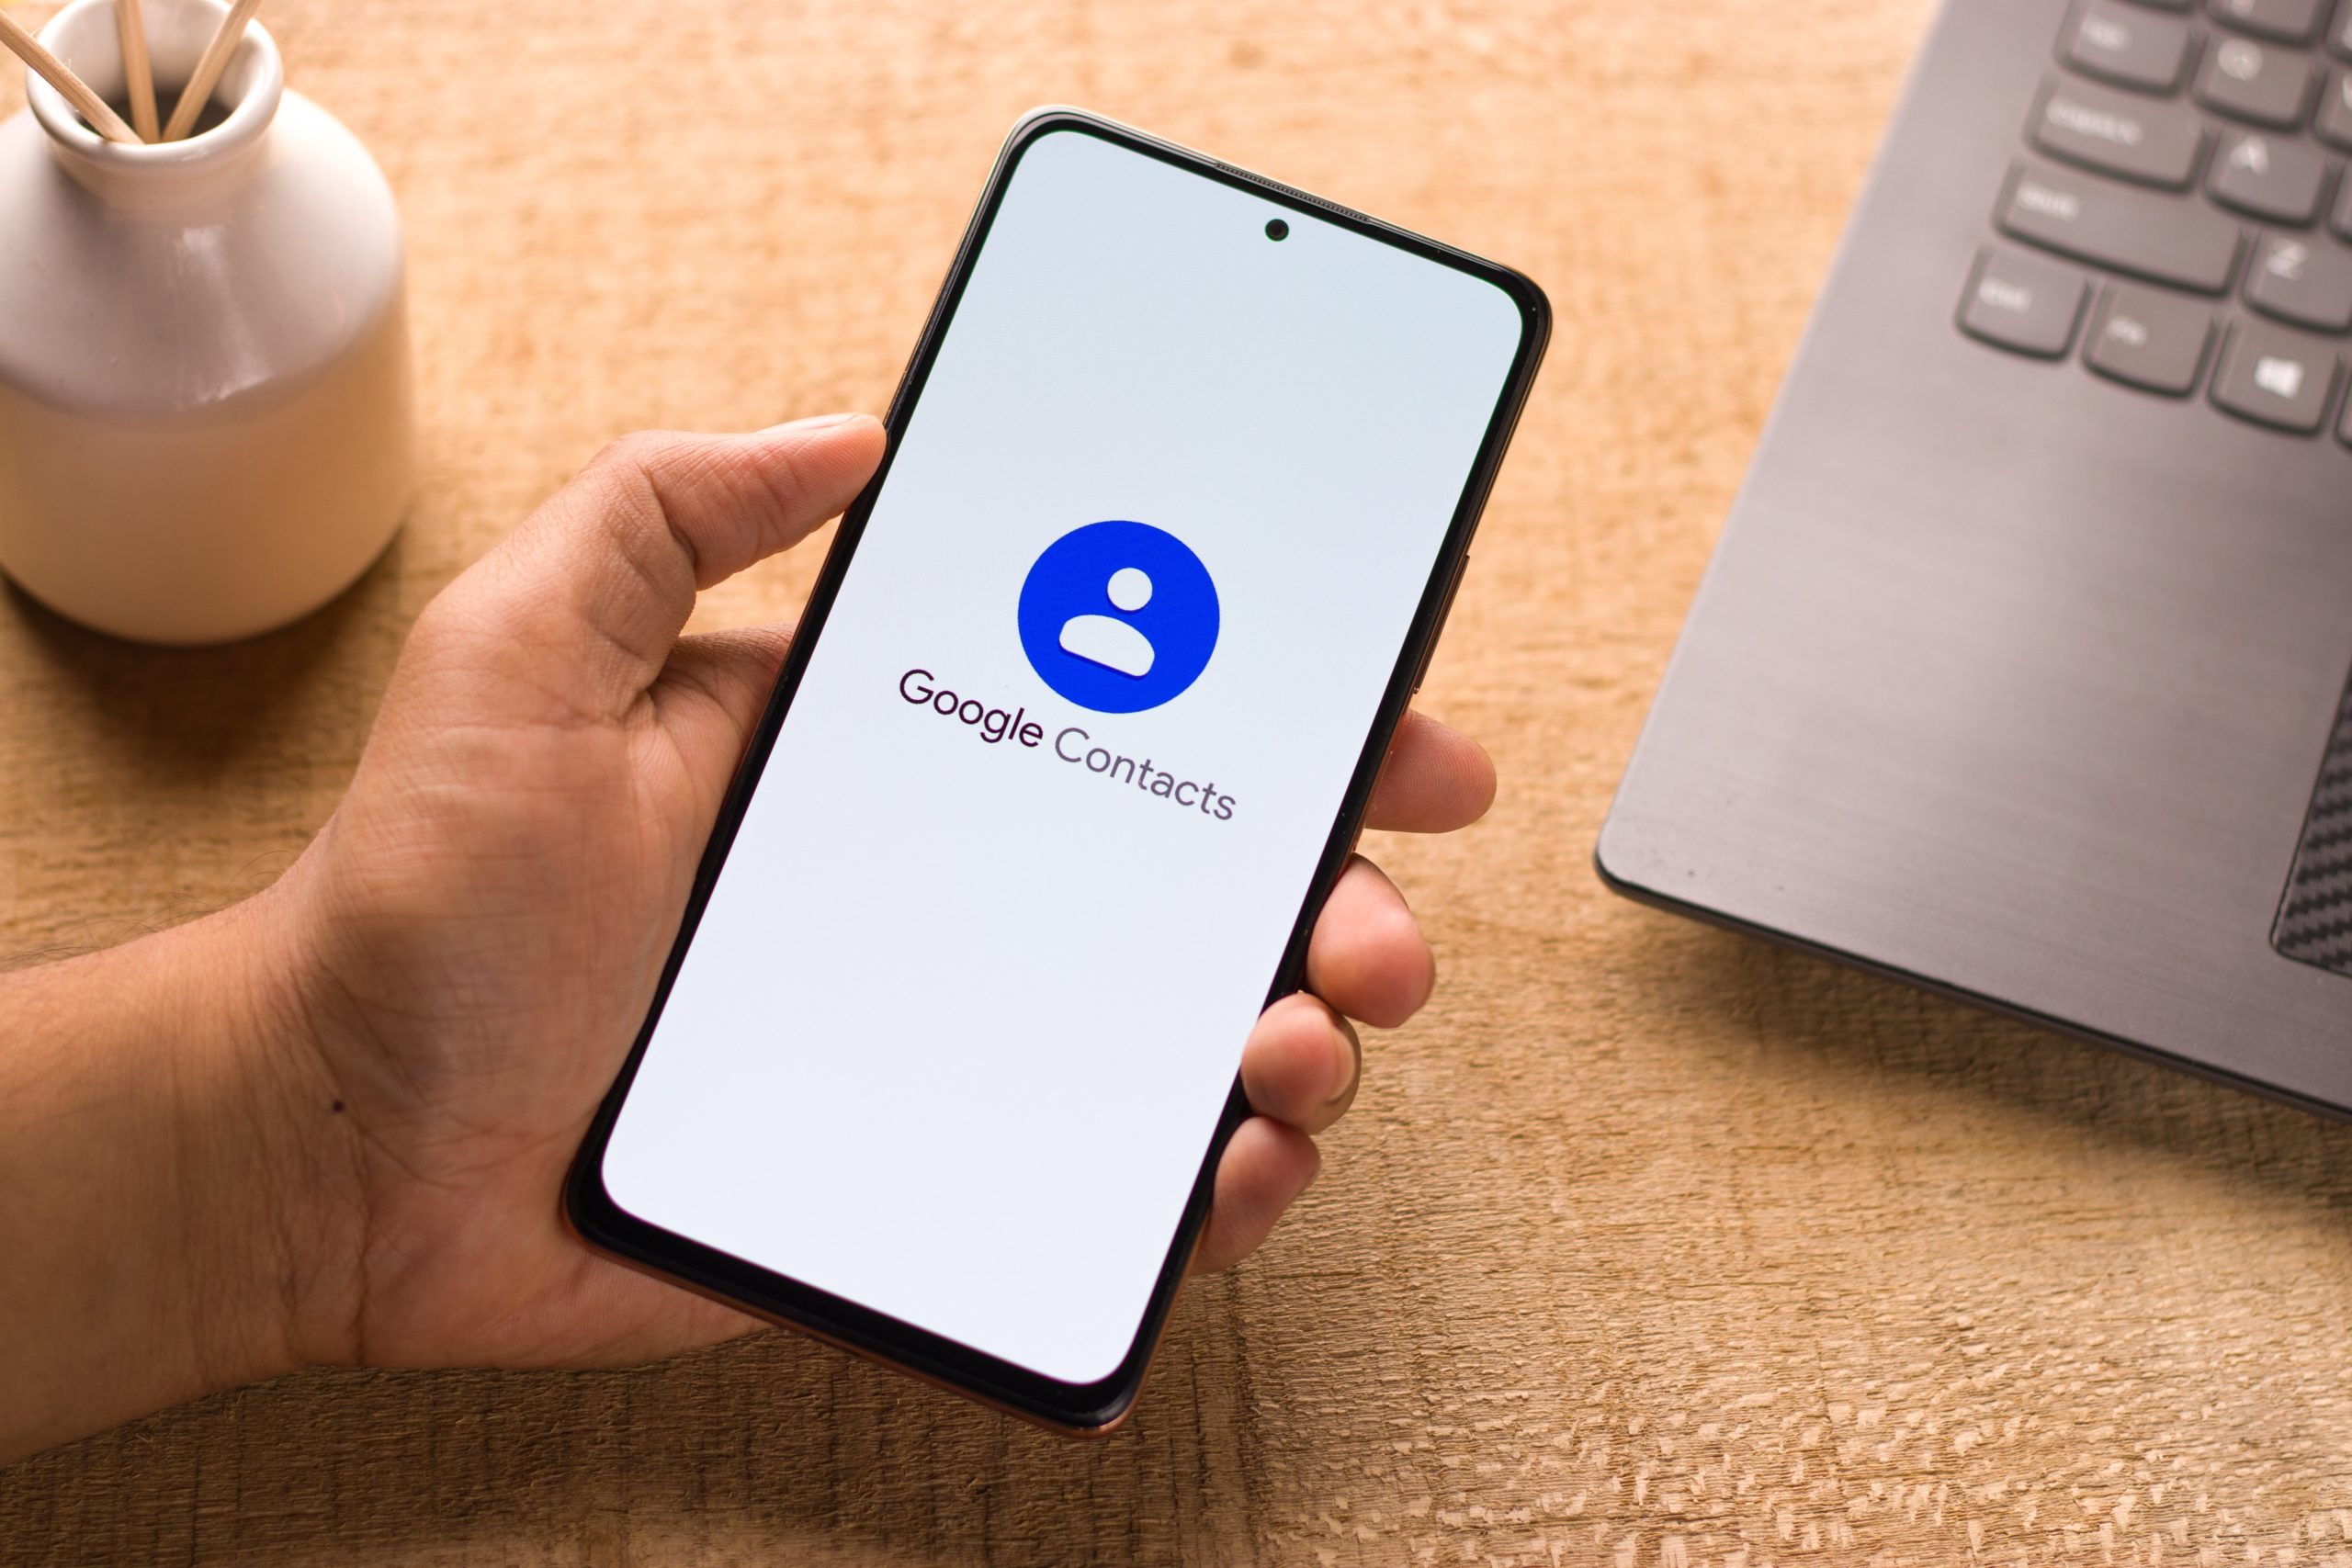 Delete Your Duplicate Google Contacts, Because It’s Easier Than You Think